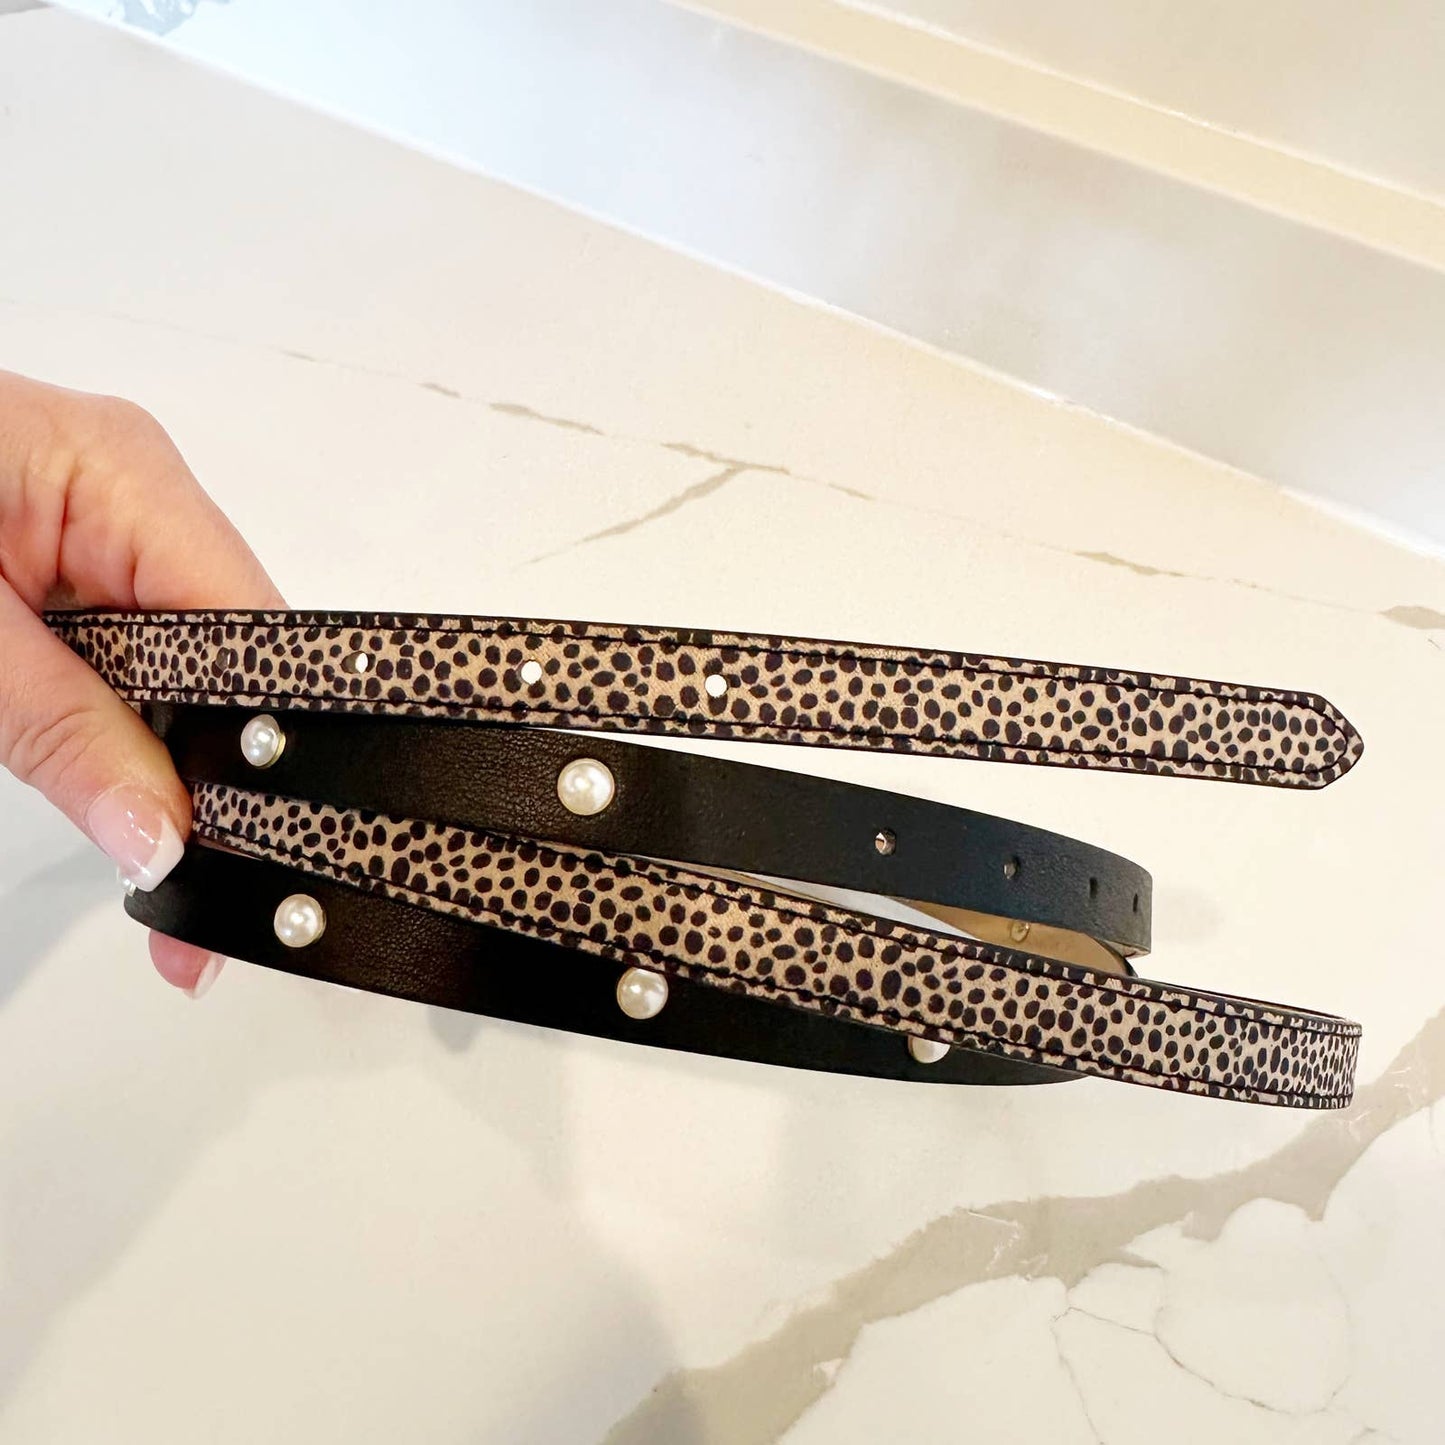 Linea Pelle 2-for-1 Skinny Belt Pack of 2 Black and Cheetah Leopard Small